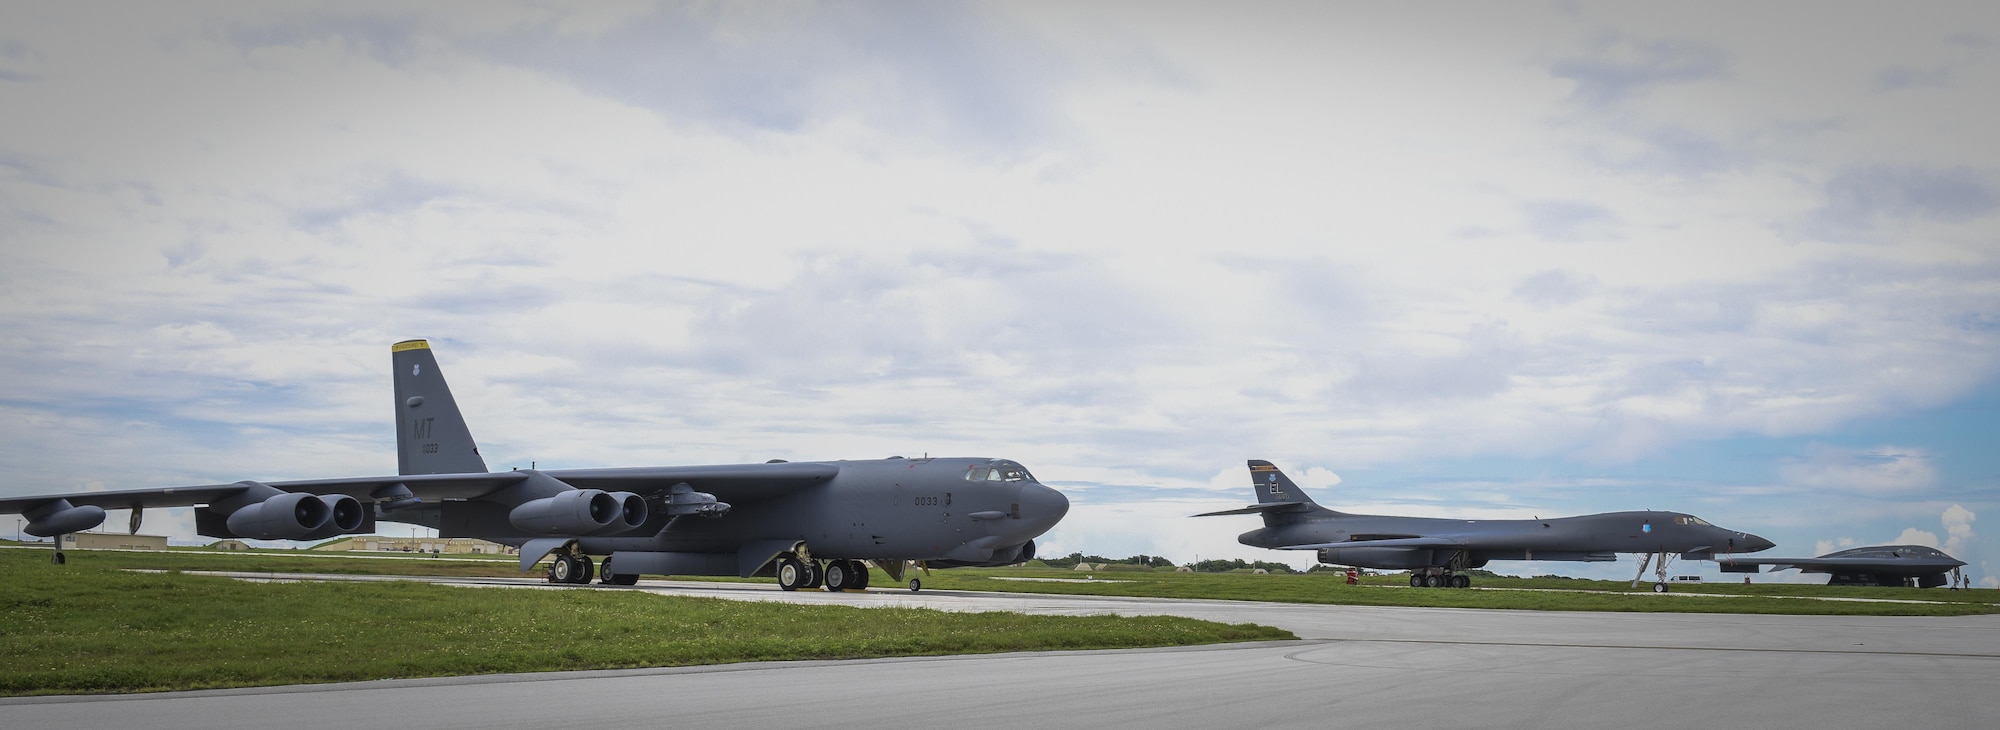 A B-52 Stratofortress, B-1B Lancer and B-2 Spirit sit beside one another on the flightline at Andersen Air Force Base, Guam, Aug.10, 2016. The occasion marked the first time in history that all three of Air Force Global Strike Command's strategic bombers were positioned to simultaneously conduct operations in the U.S. Pacific Command region. (U.S. Air Force photo/Tech. Sgt. Richard Ebensberger)